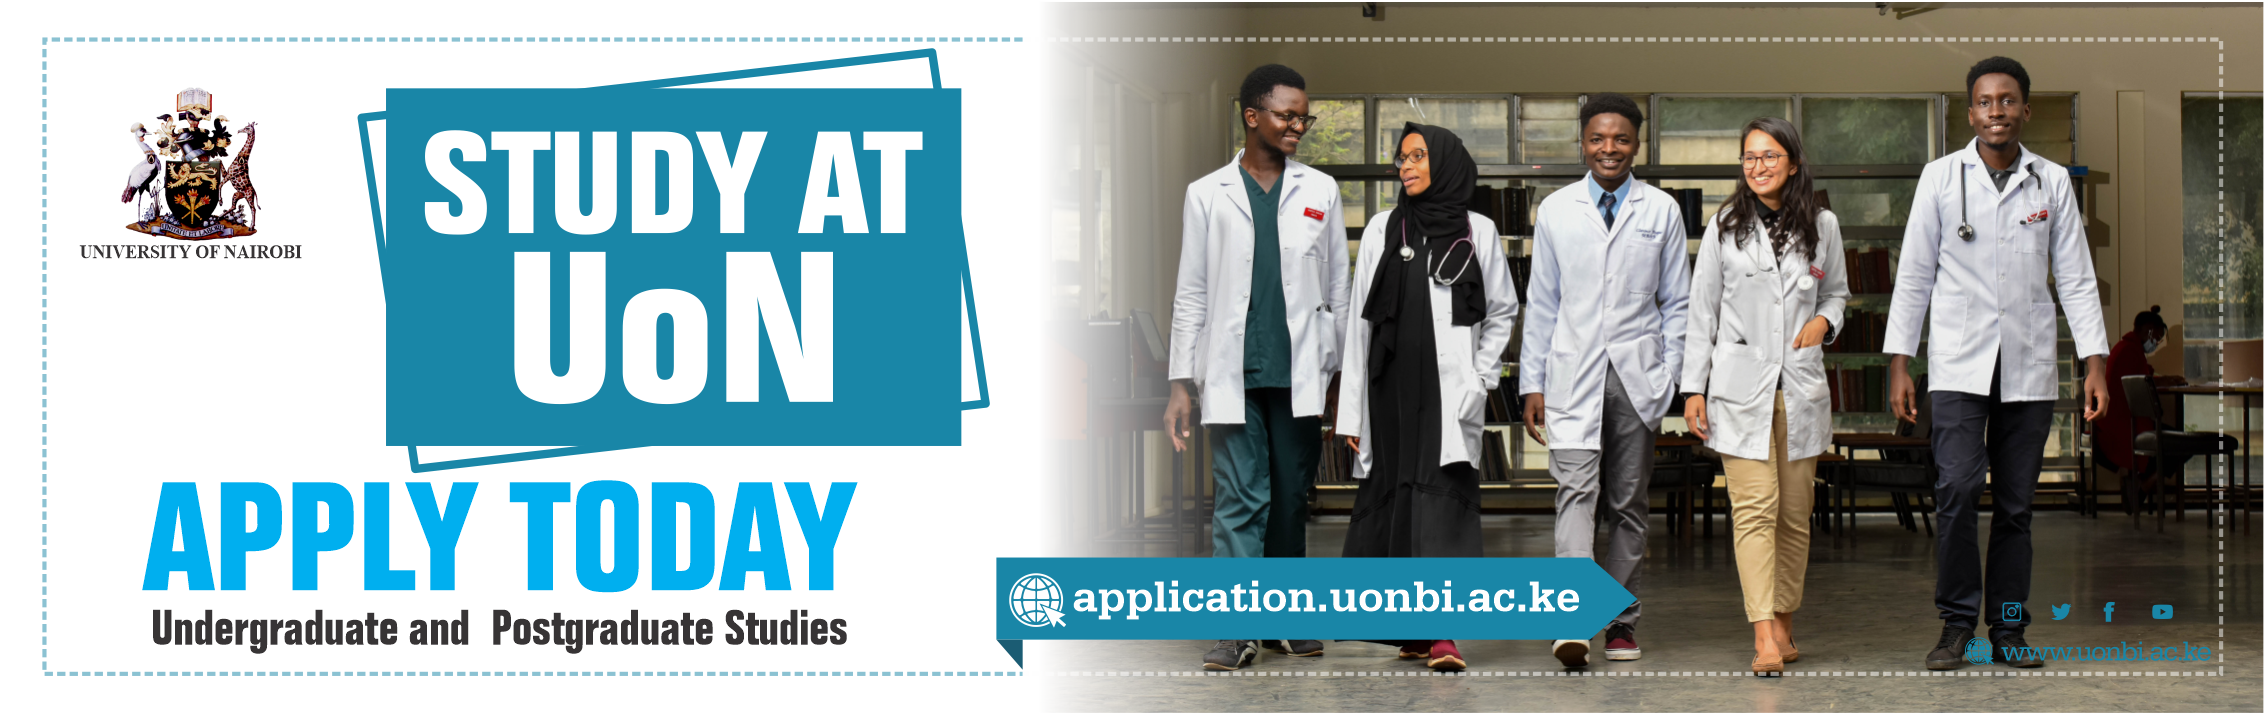 APPLY TODAY STUDY AT UON